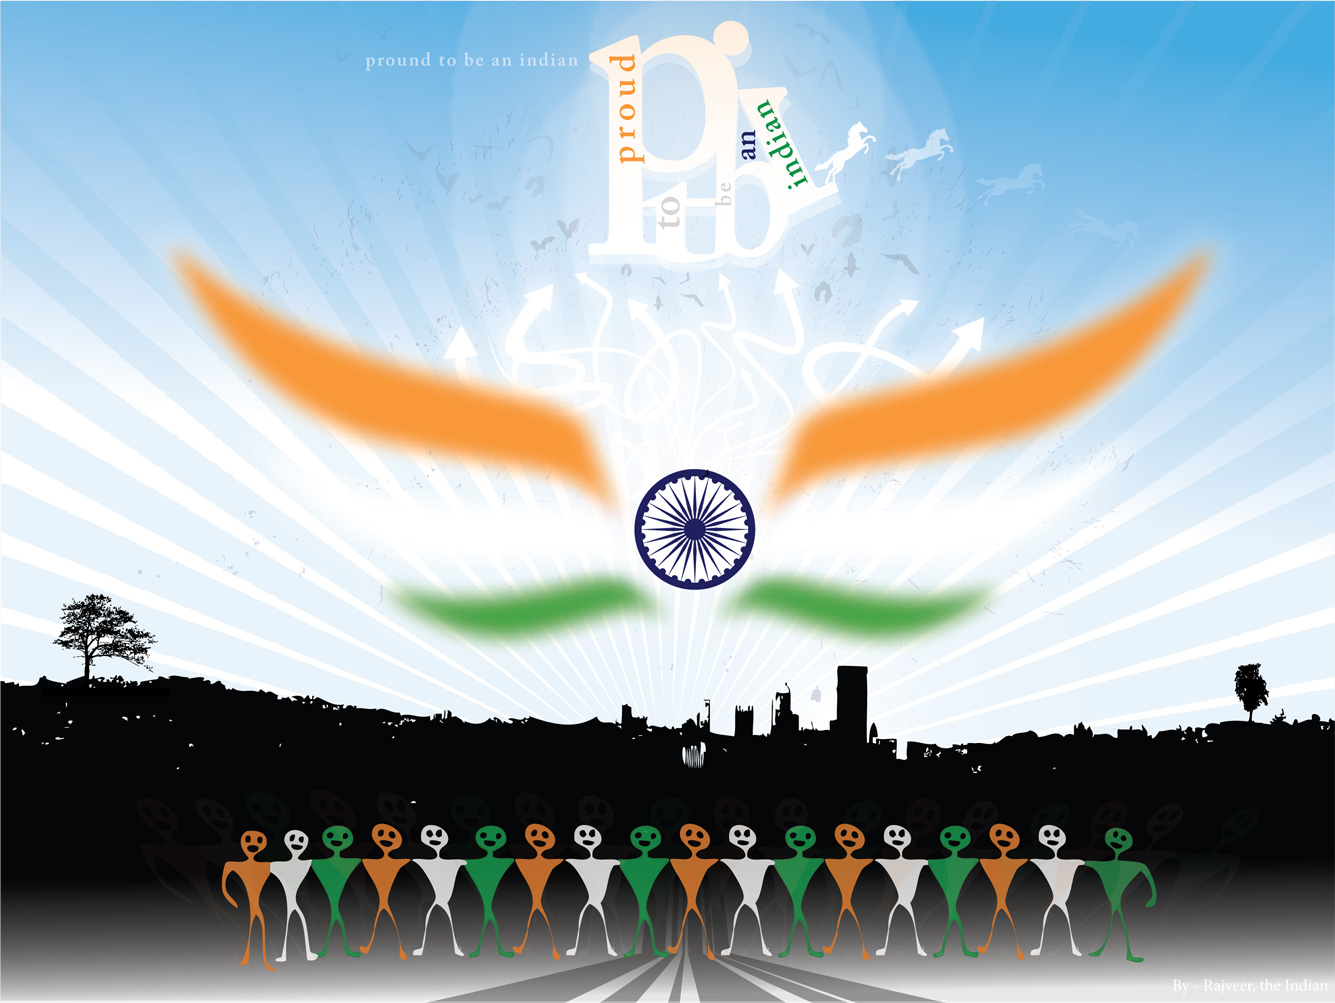 10586 Indian Flag Stock Photos Pictures  RoyaltyFree Images  iStock  Indian  flag mask Indian flag color vector Native american indian flag